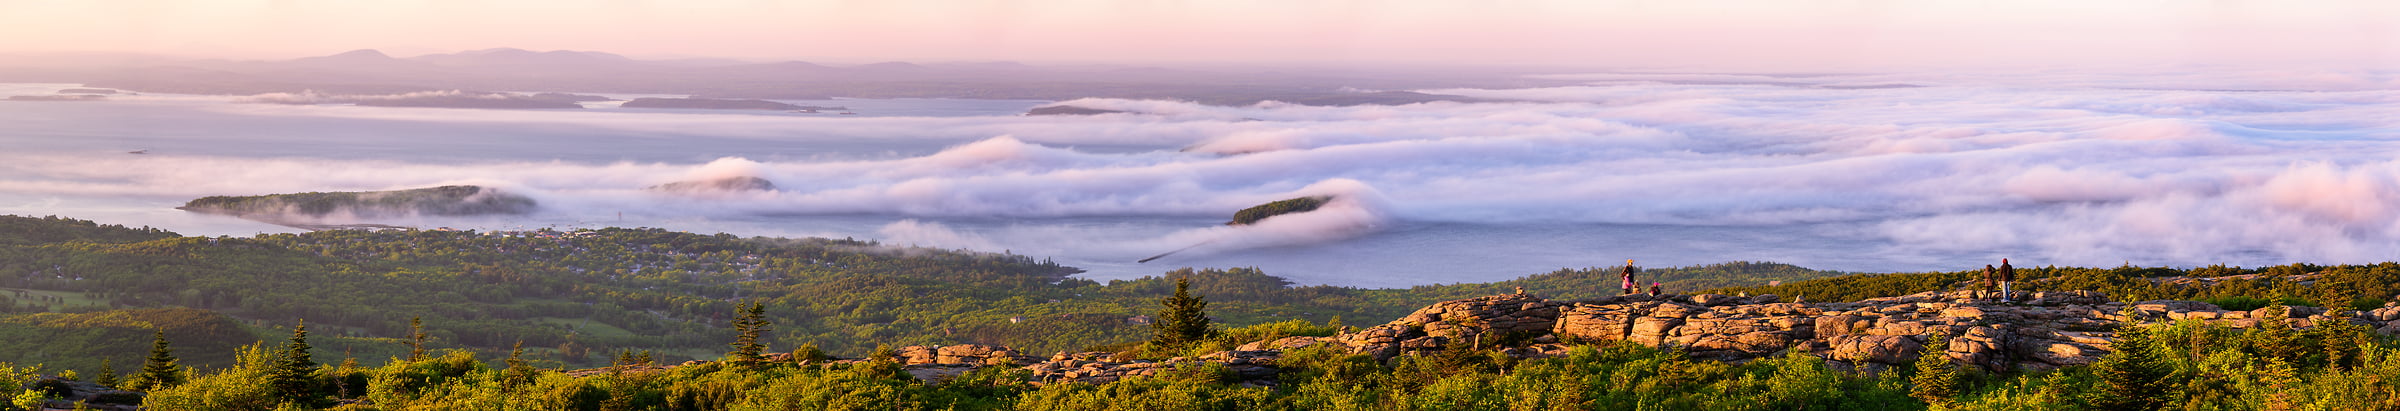 219 megapixels! A very high resolution, large-format VAST photo of fog covering Bar Harbor; fine art landscape photograph created by Aaron Priest from Cadillac Mountain in Acadia National Park, Maine